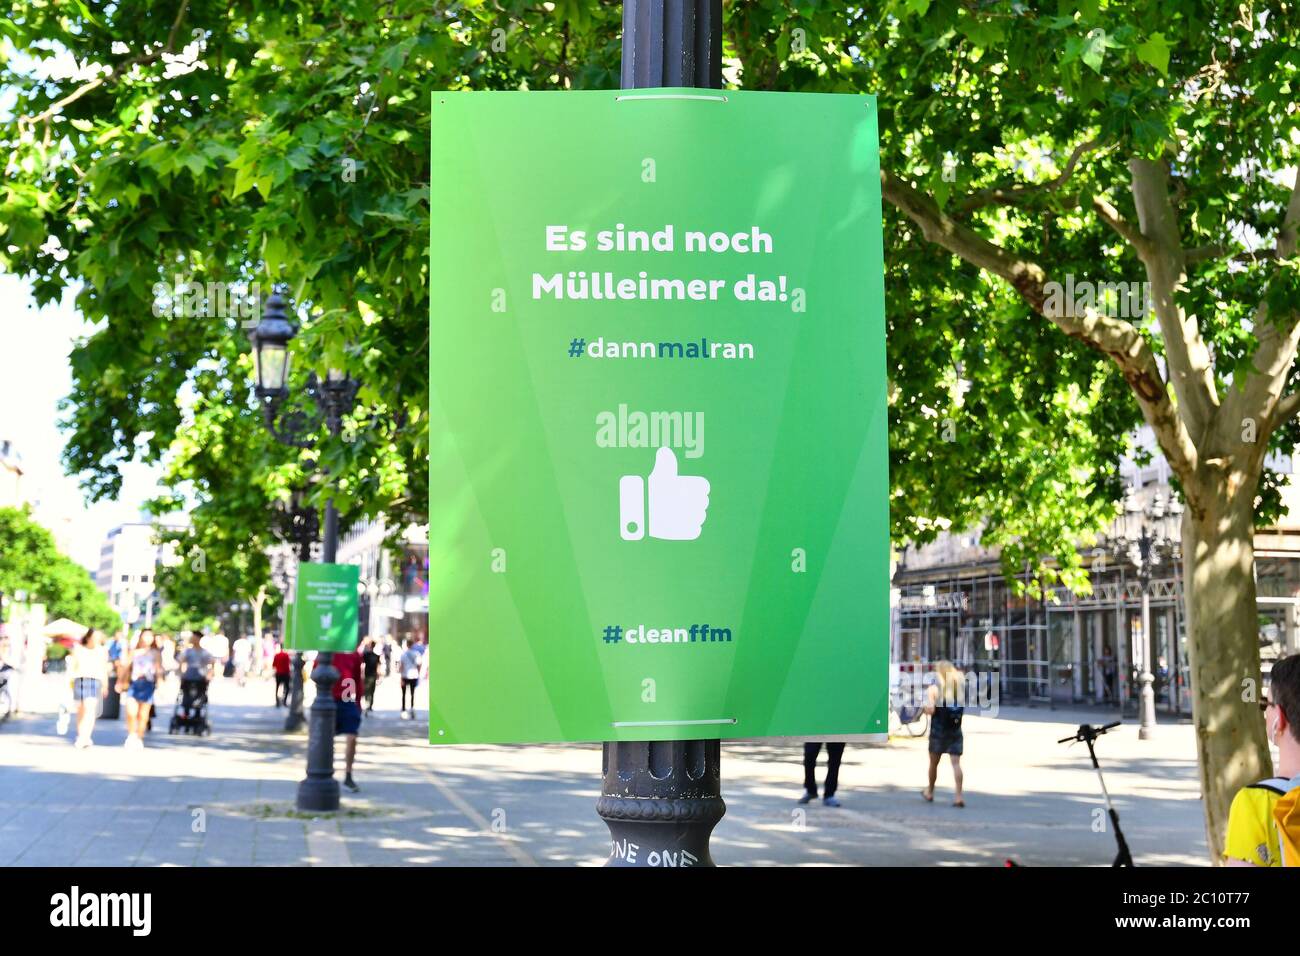 Frankfurt am Main, Germany - June 2020: Sign saying 'There are still trash cans left' as part of campaign to keep Frankfurt city clean Stock Photo